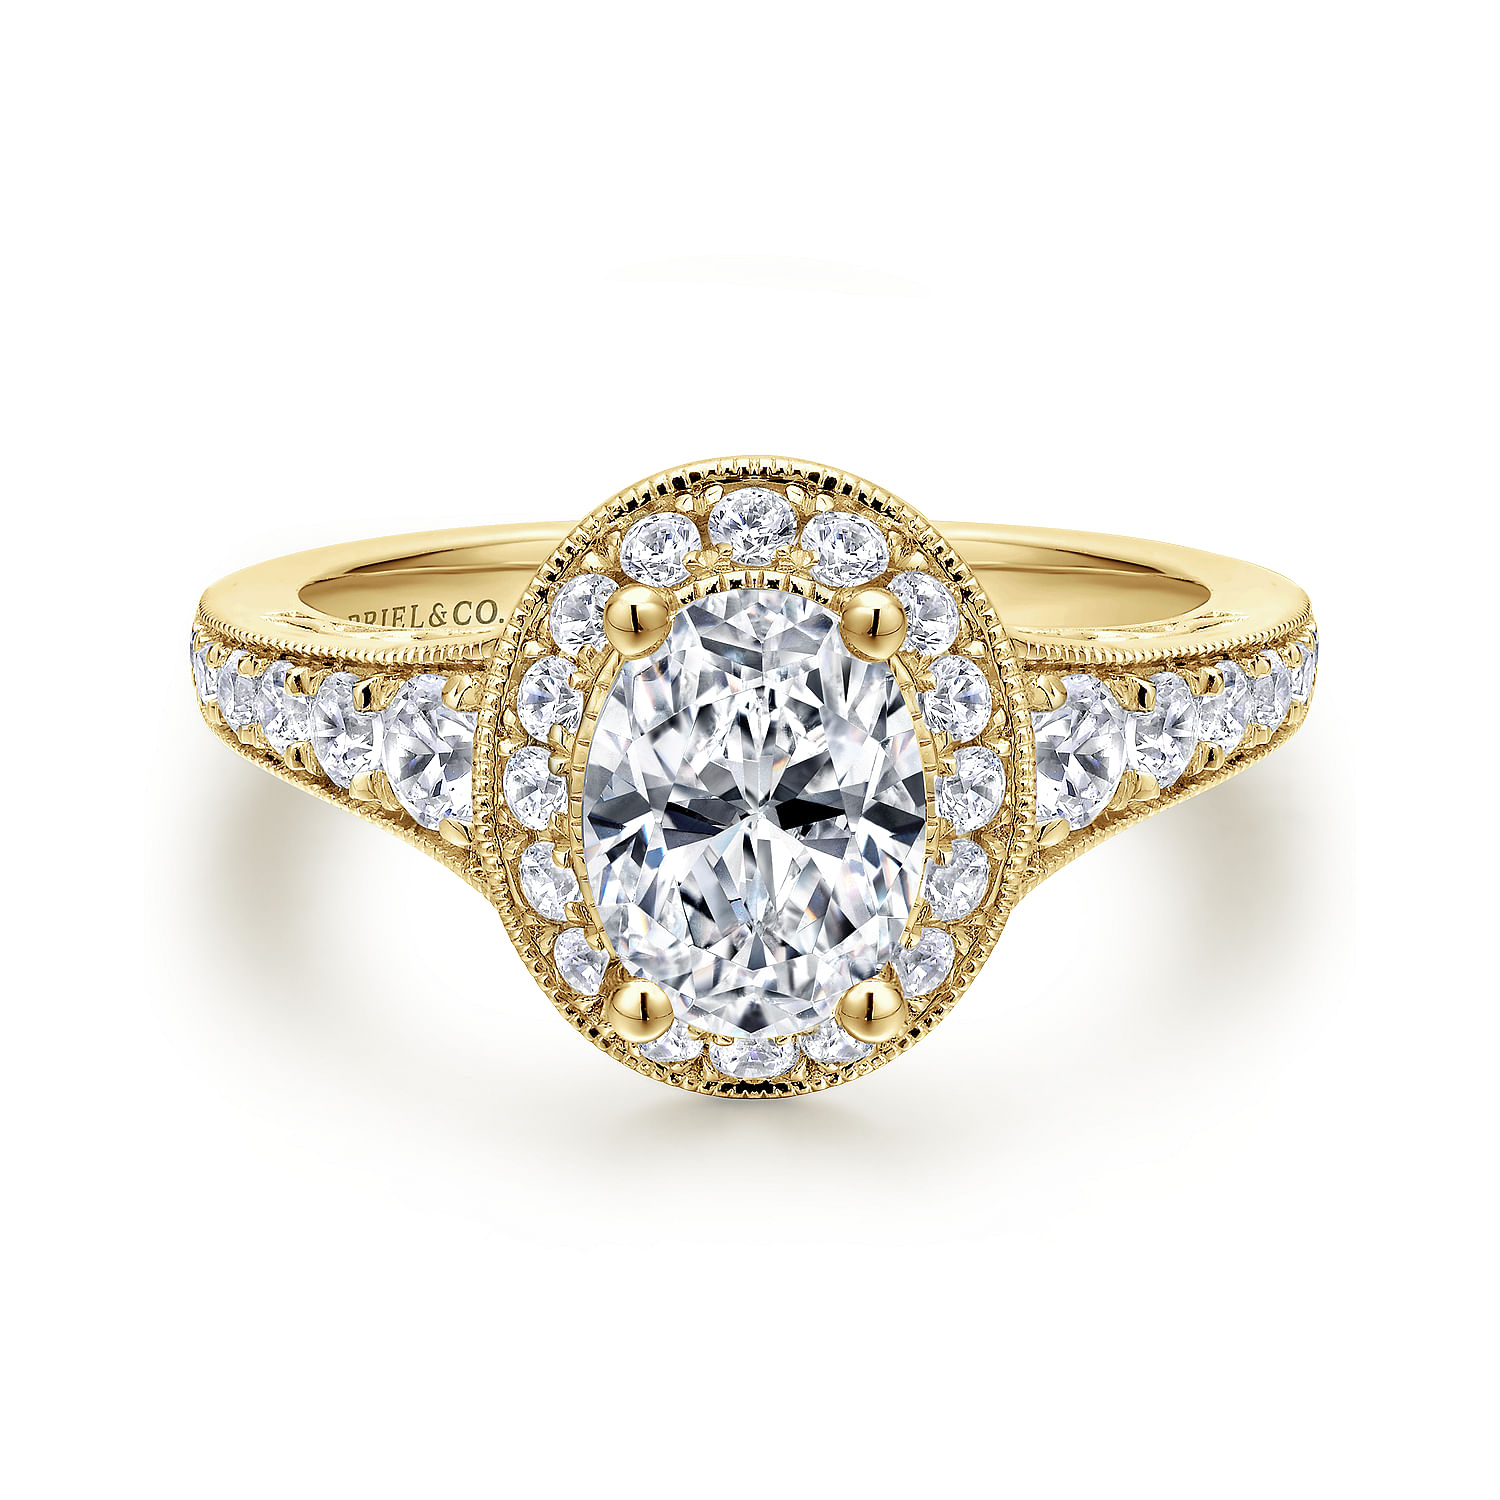 Cortlandt - Vintage Inspired 14K Yellow Gold Oval Halo Diamond Engagement Ring